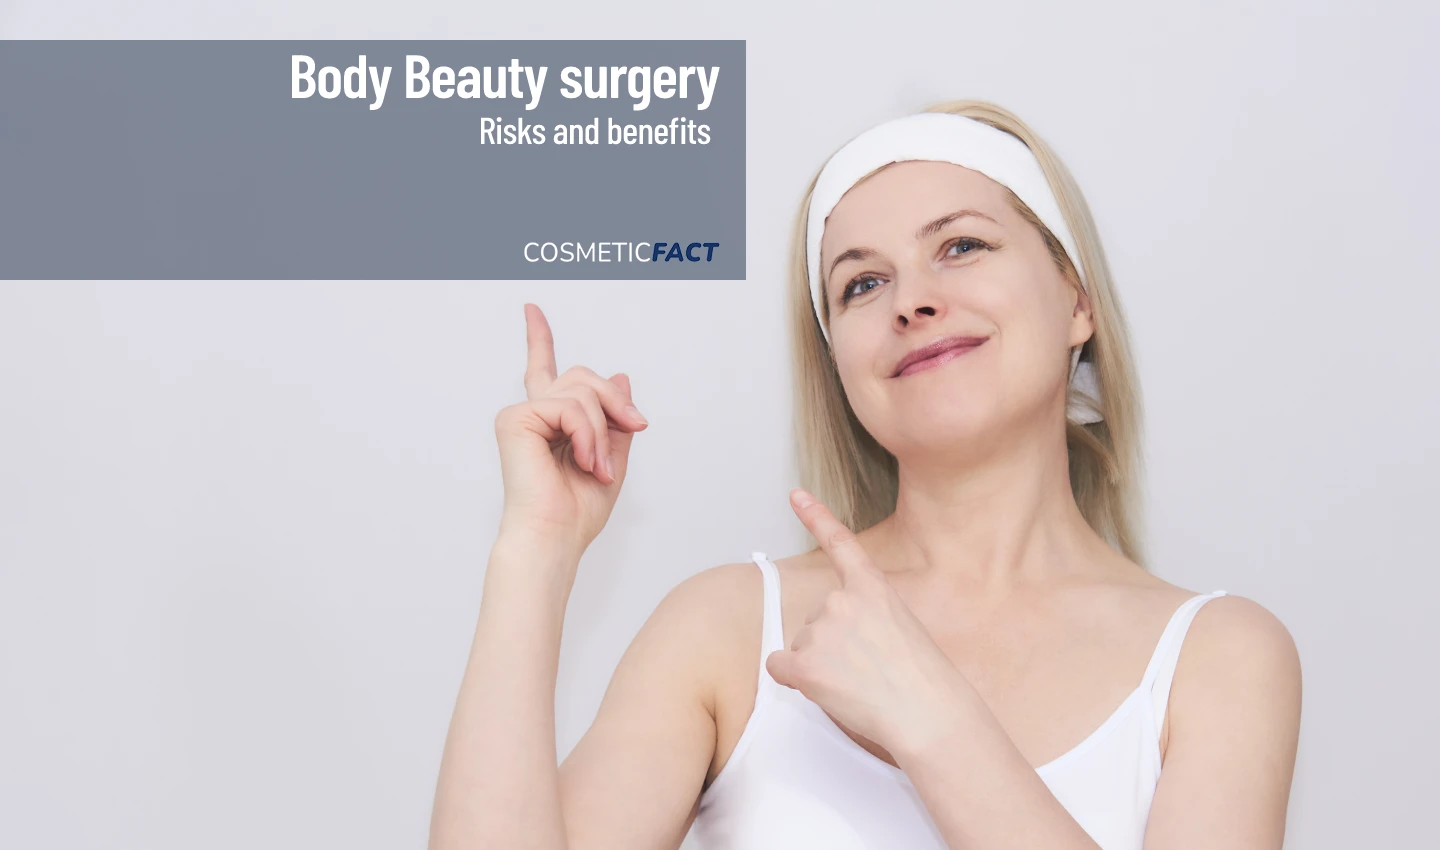 A woman shows something with her hands, representing how to navigate risks and maximize benefits in body cosmetic surgery.